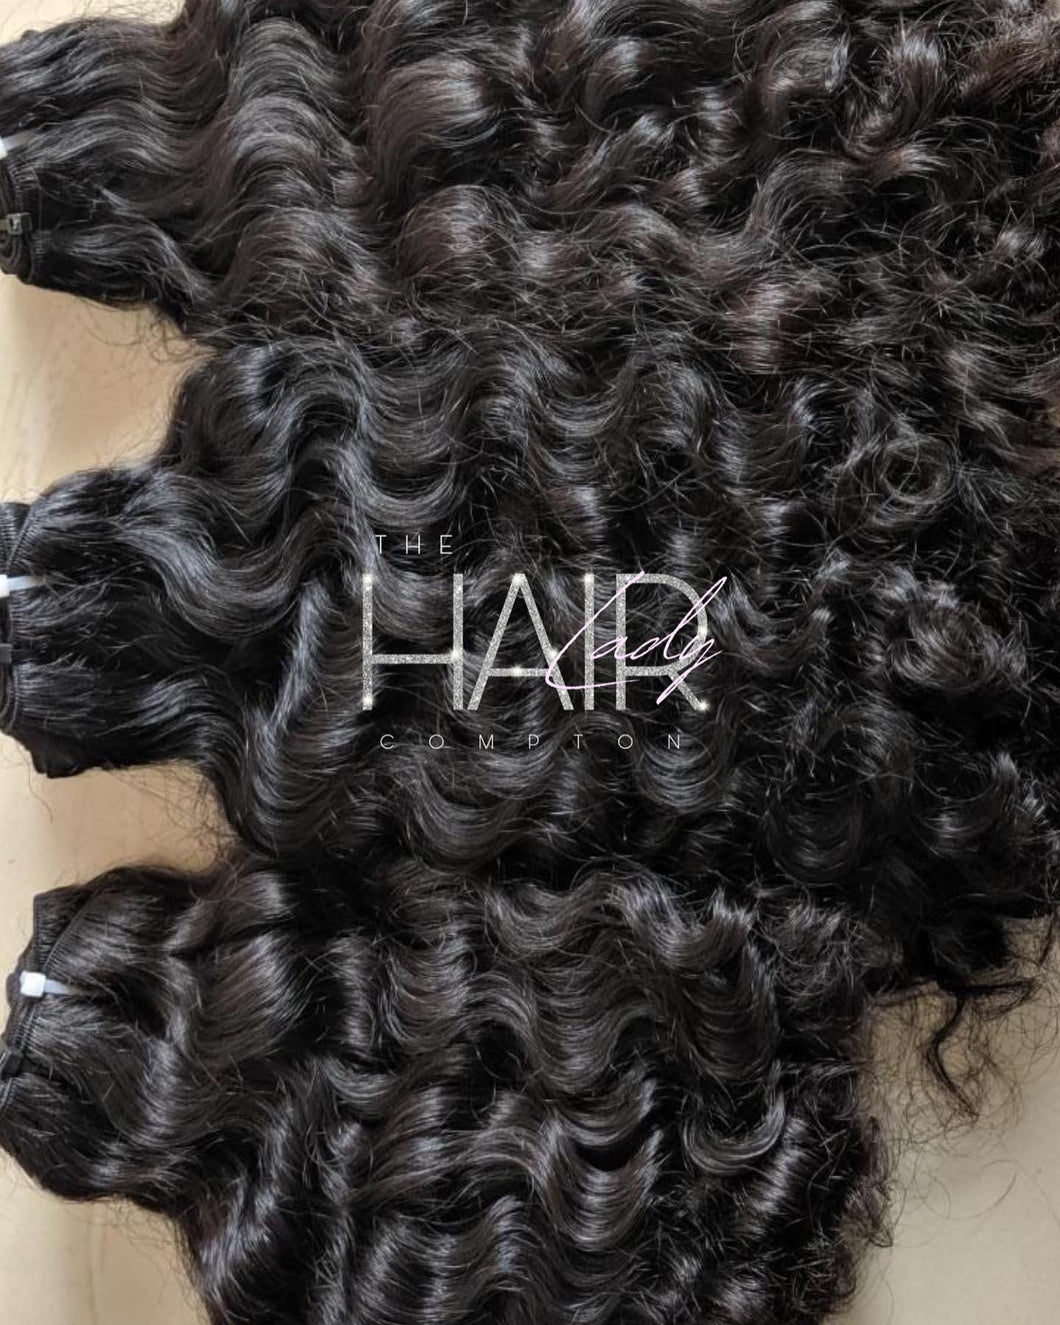 Raw Indian Curly